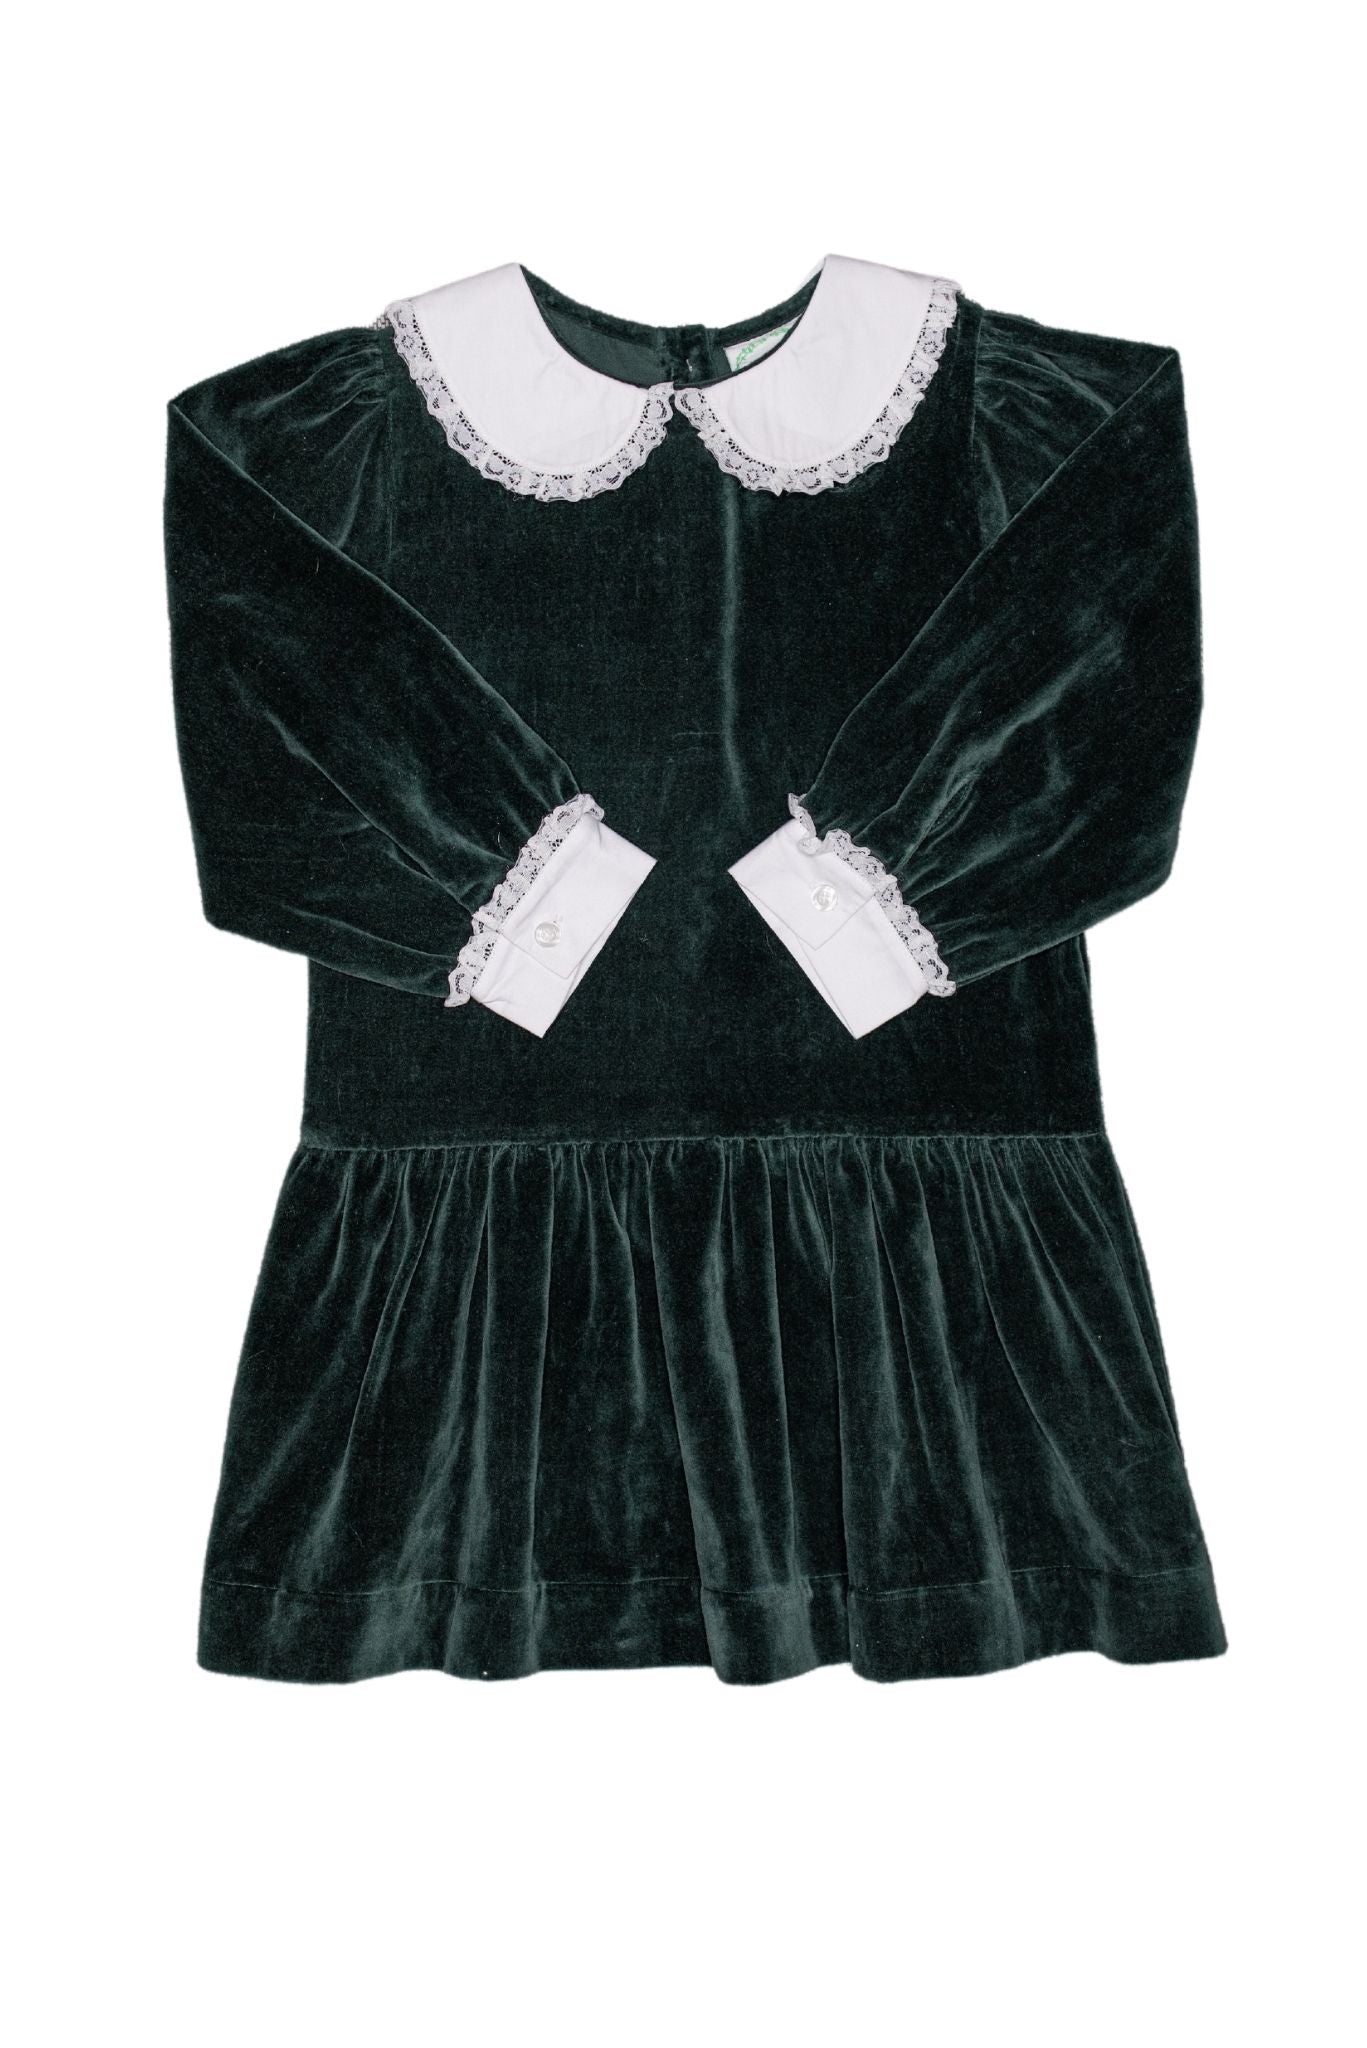 Green Velvet Drop Waist Dress with Peter Pan Collar and White Lace Details